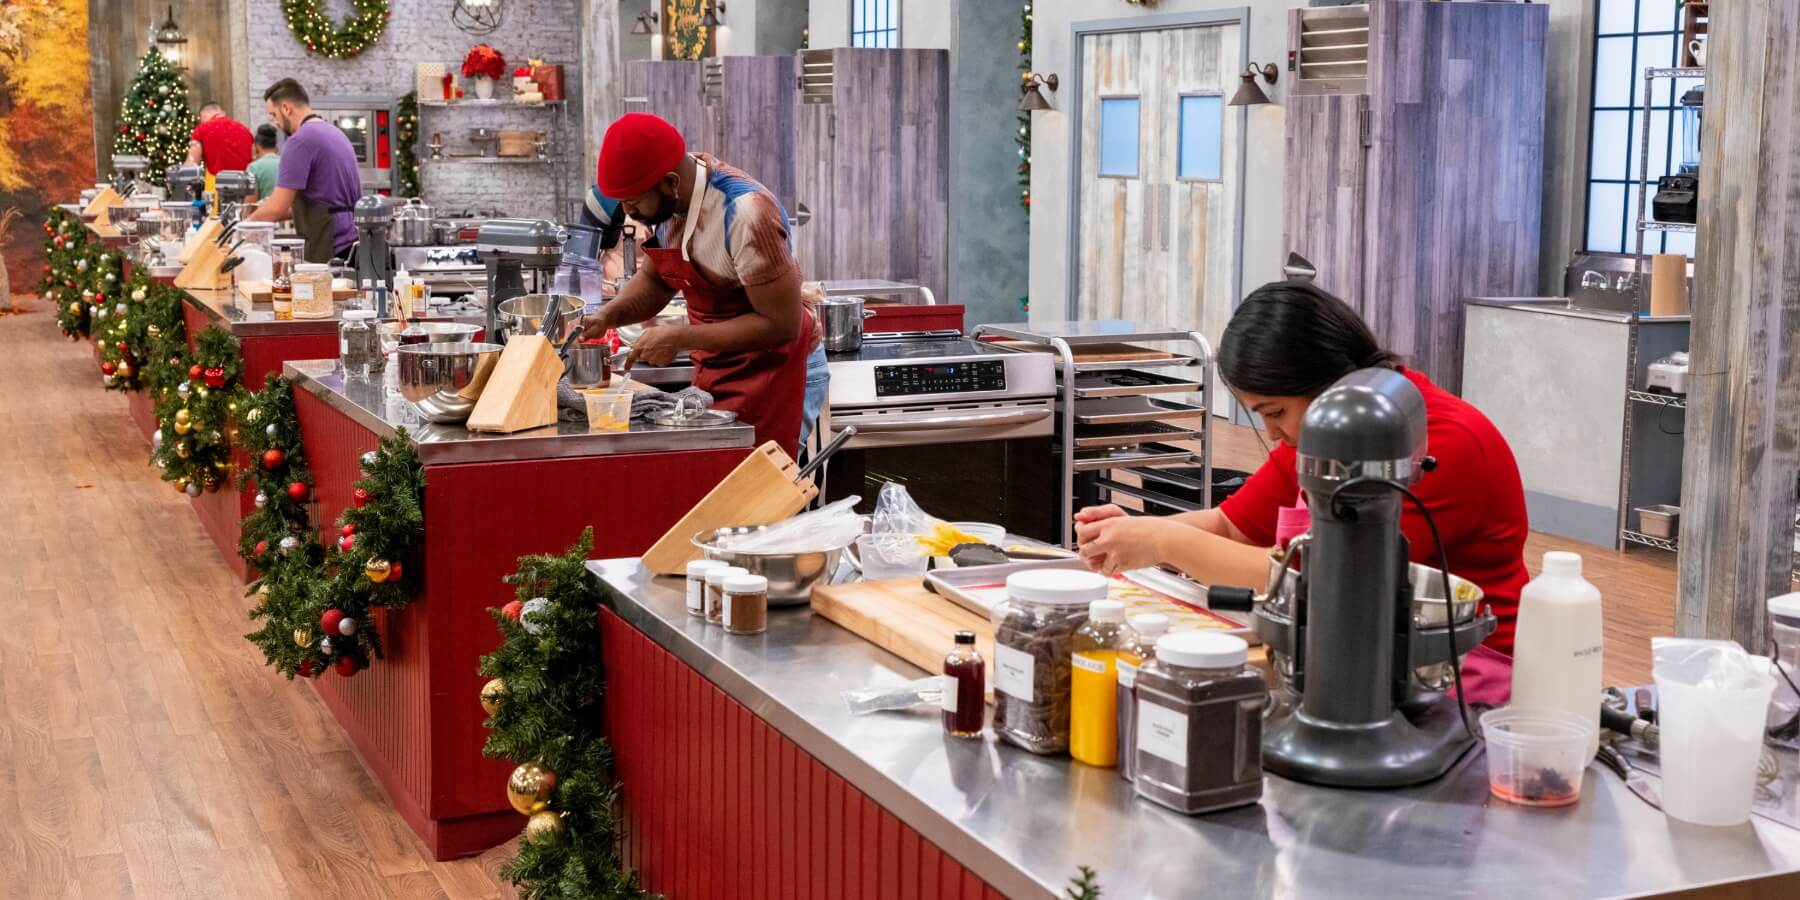 'Holiday Baking Championship' airs on the Food Network.